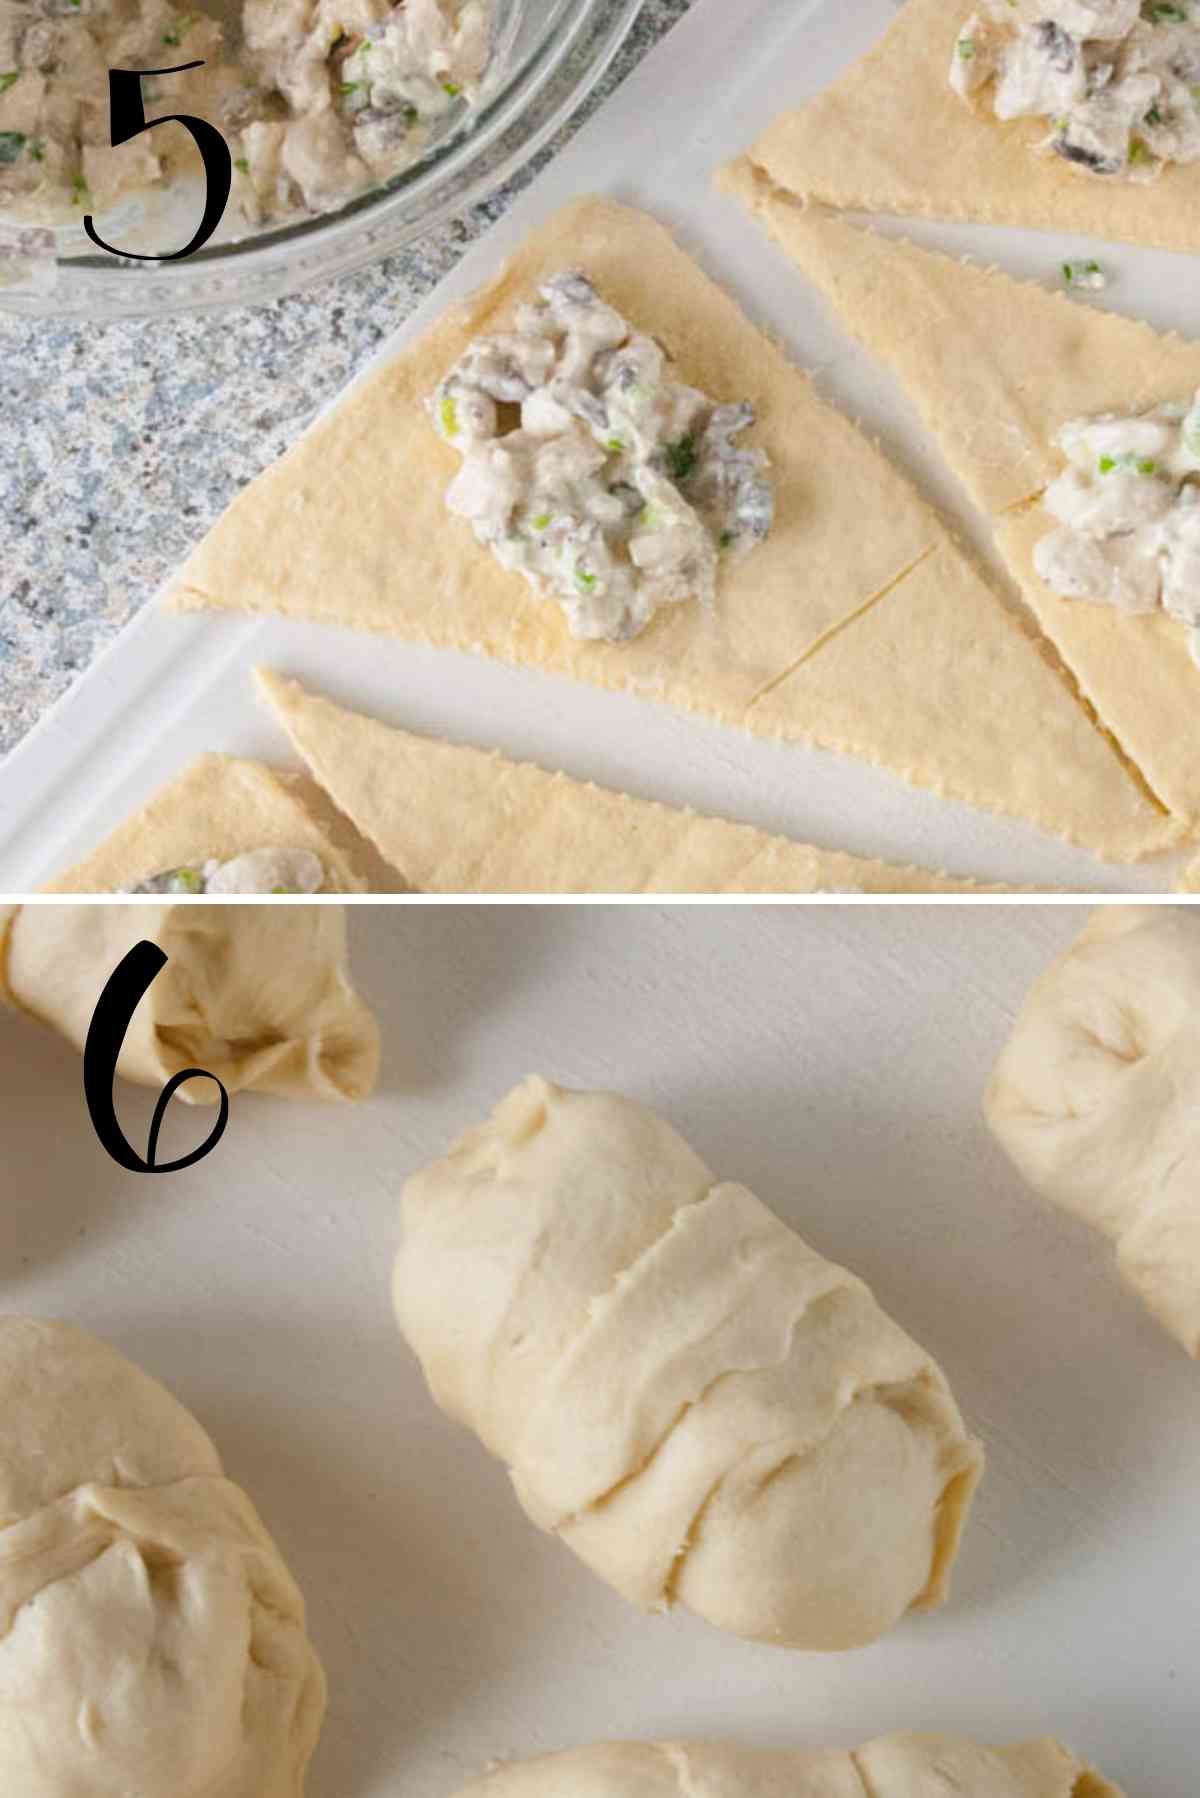 Add filling and roll up tightly!